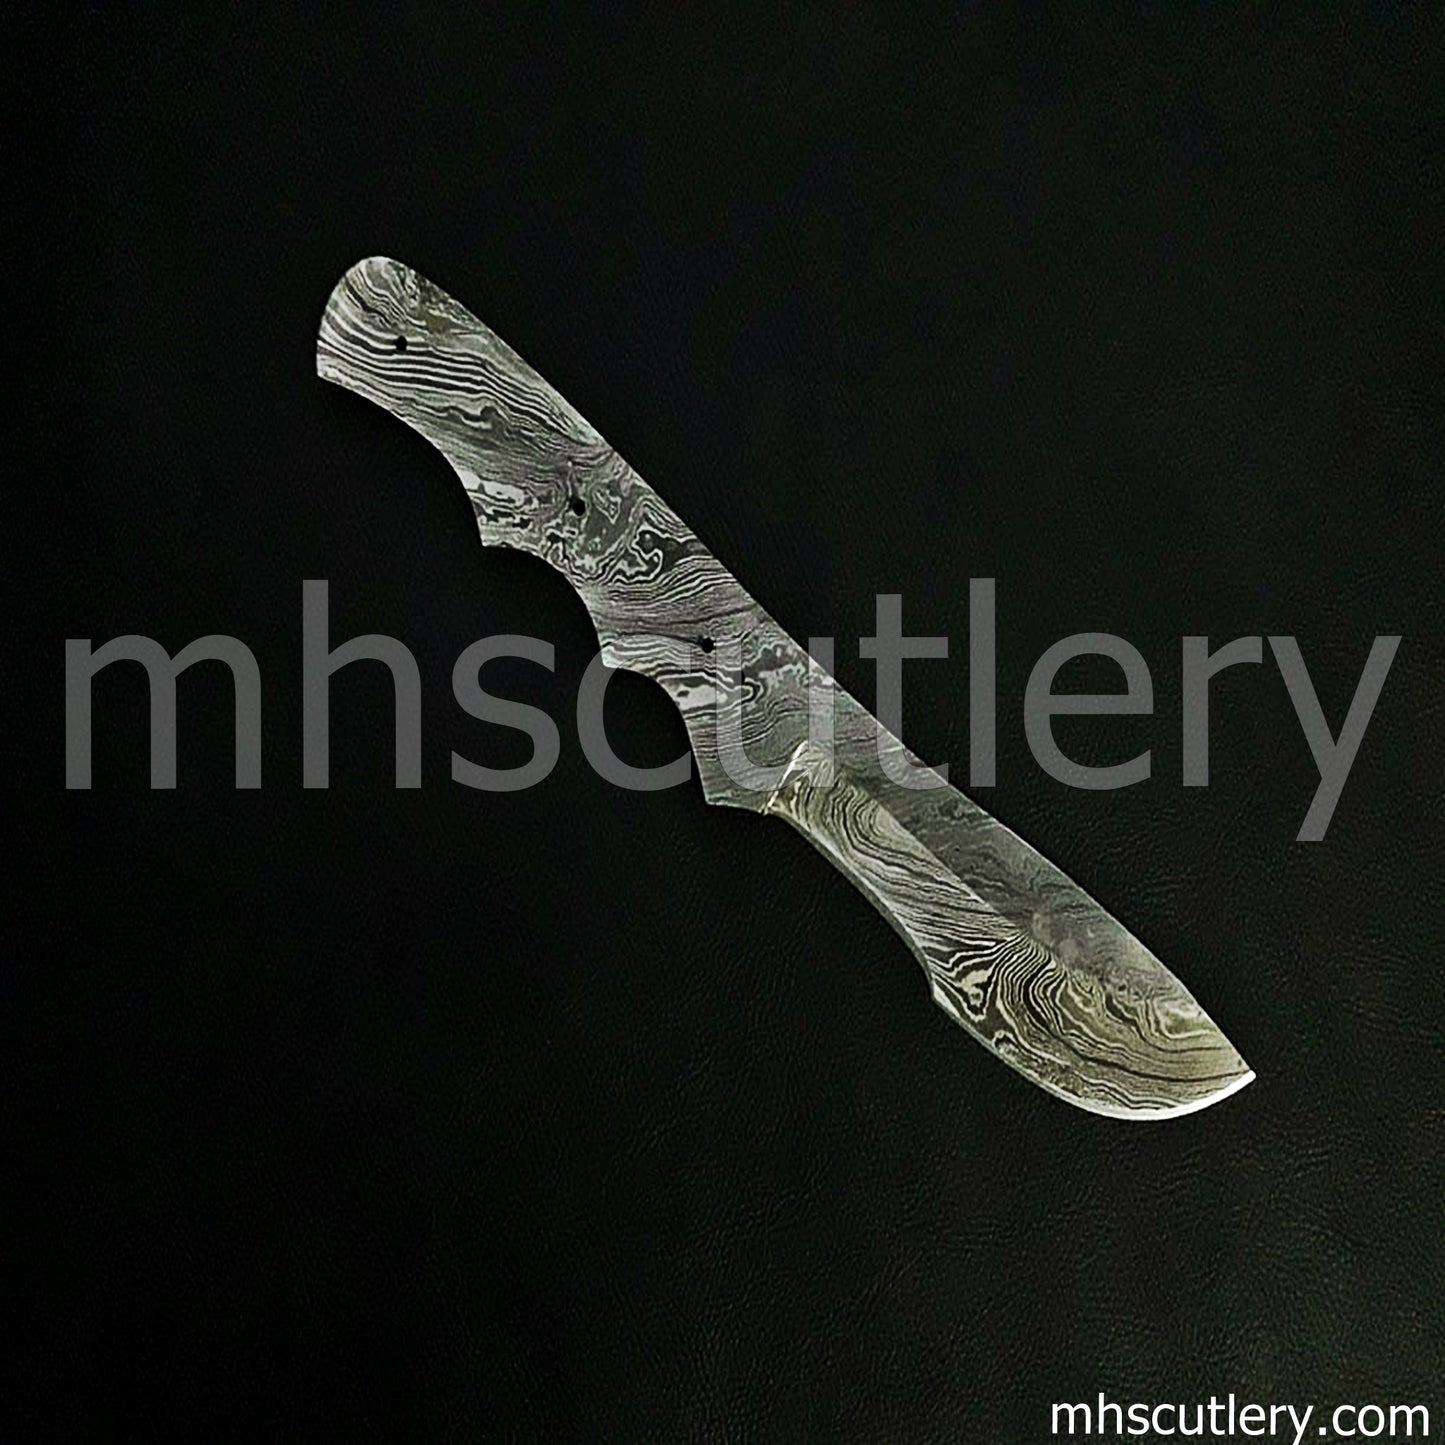 Hand Forged Damascus Steel Tactical Knife Blank Blade | mhscutlery